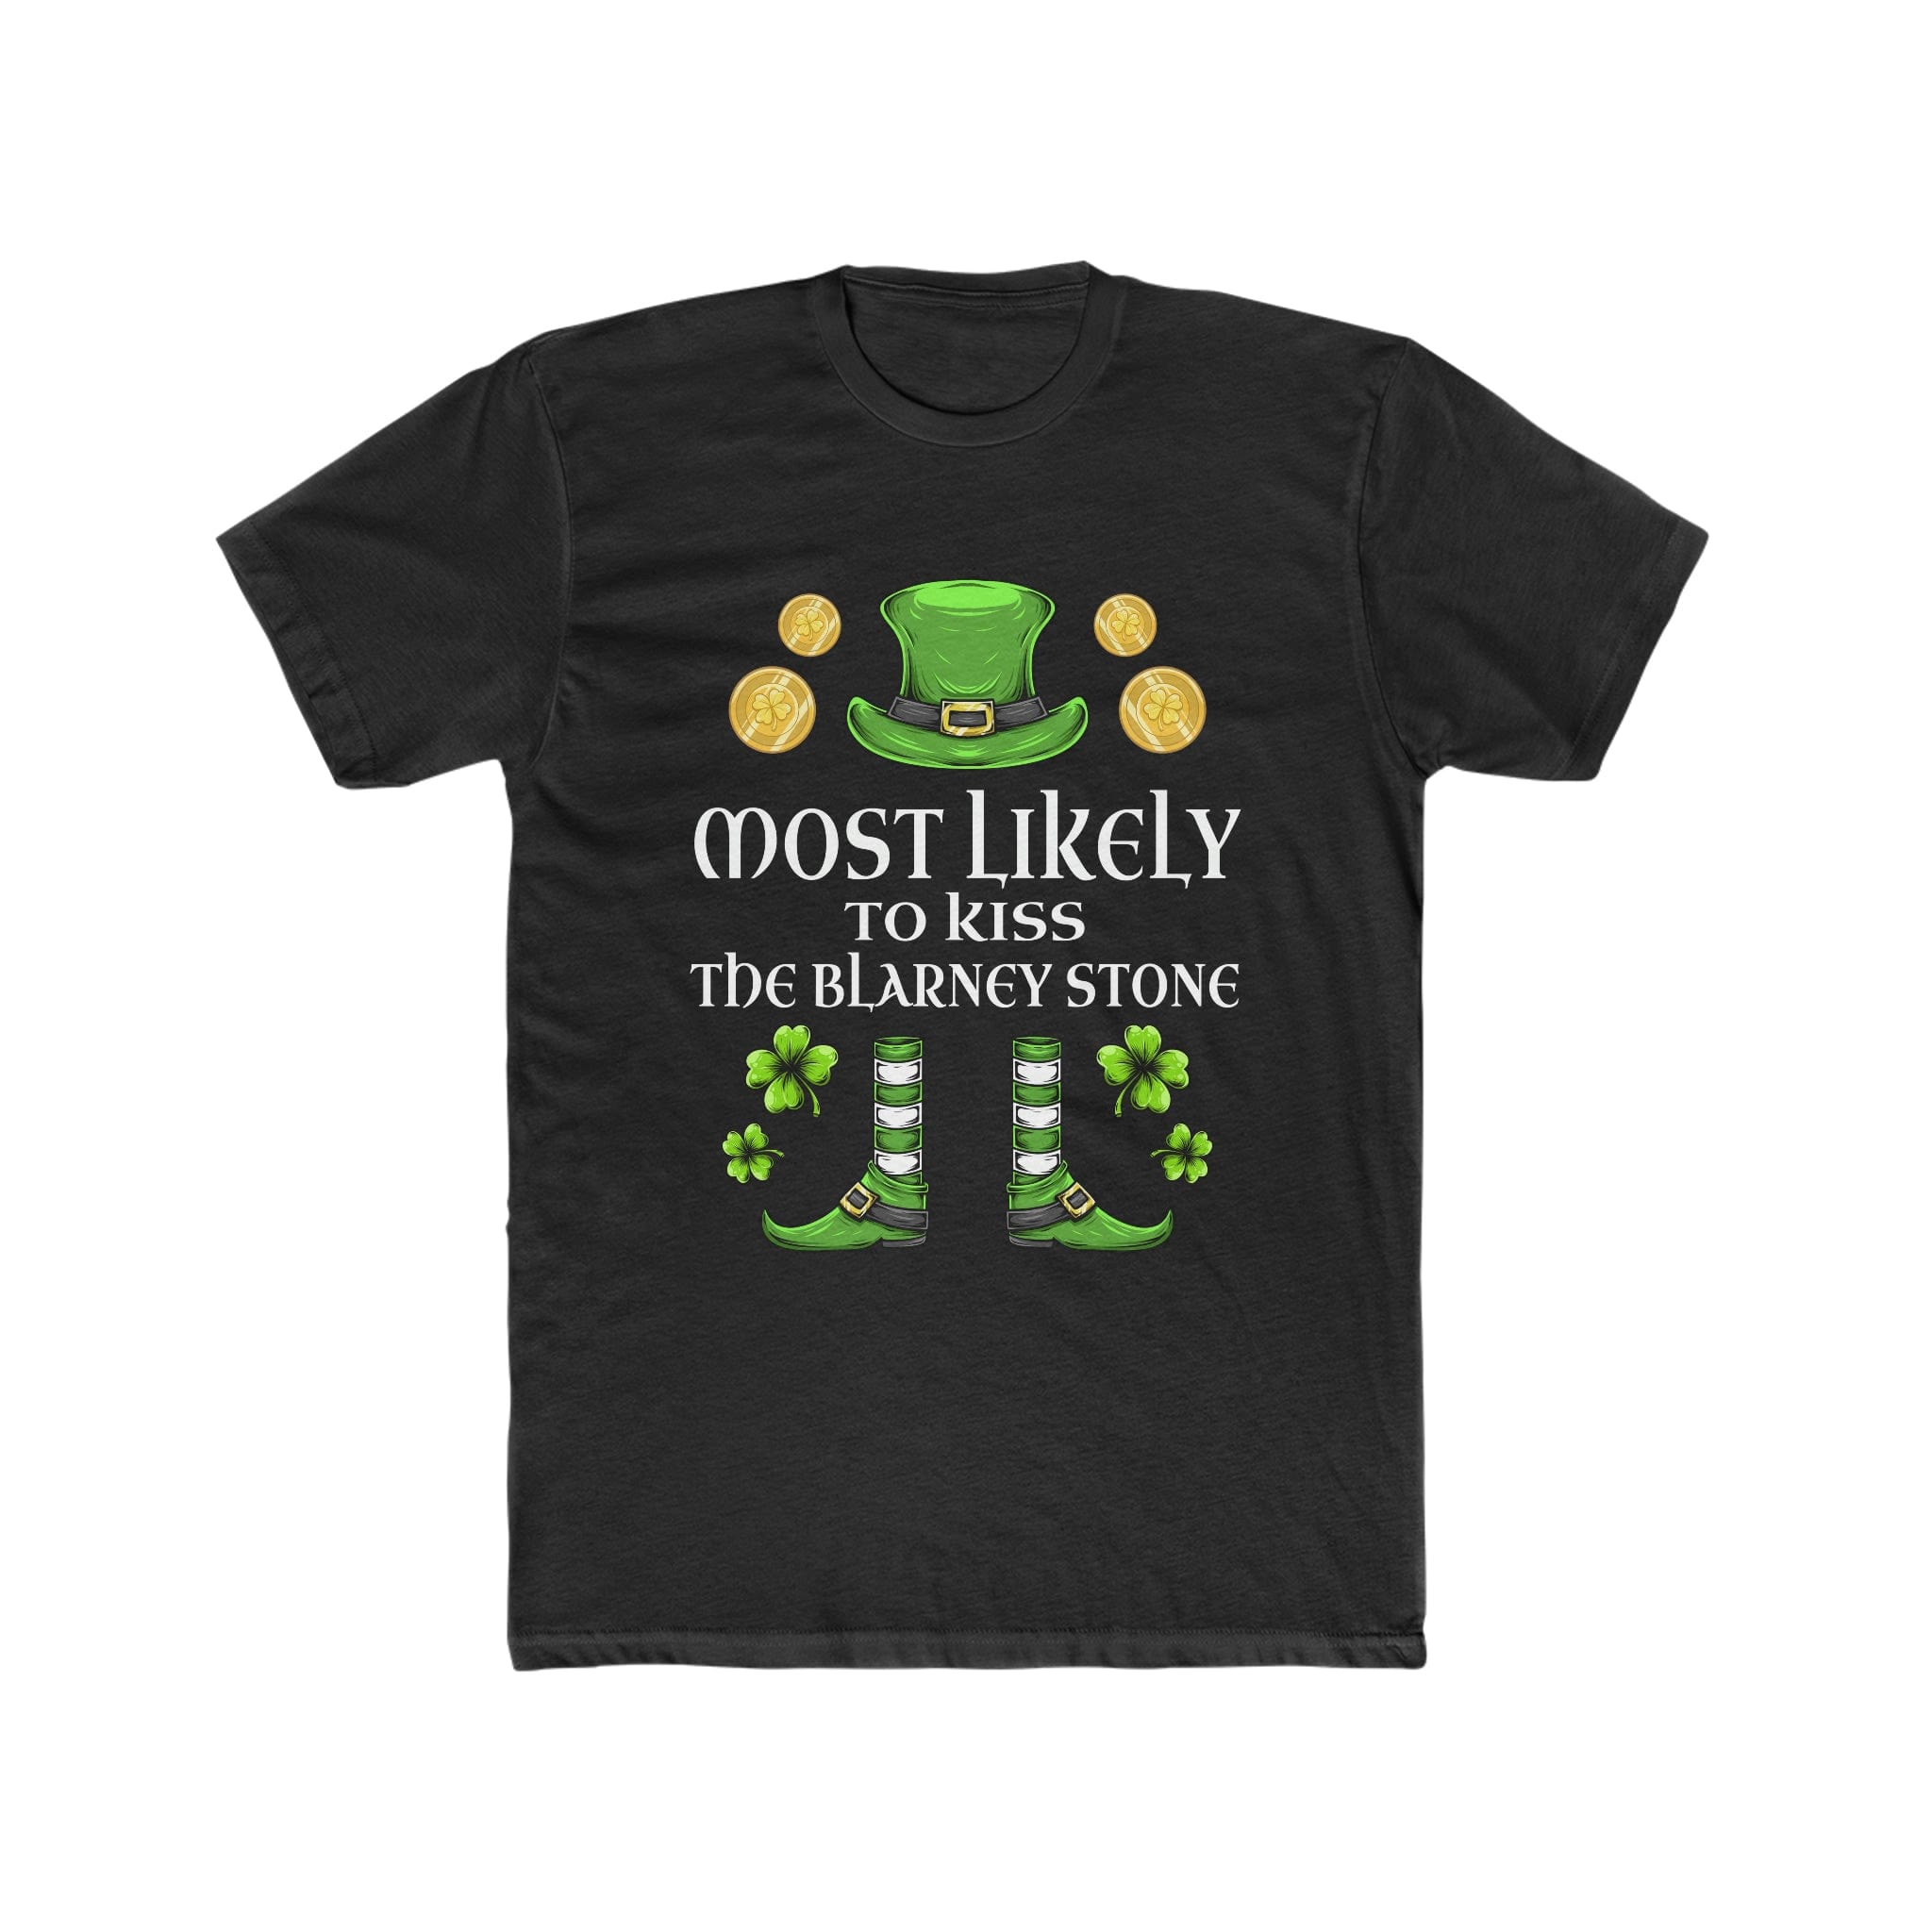 Most likely To Kiss THE BLARNEY STONE Premium Unisex Shirt